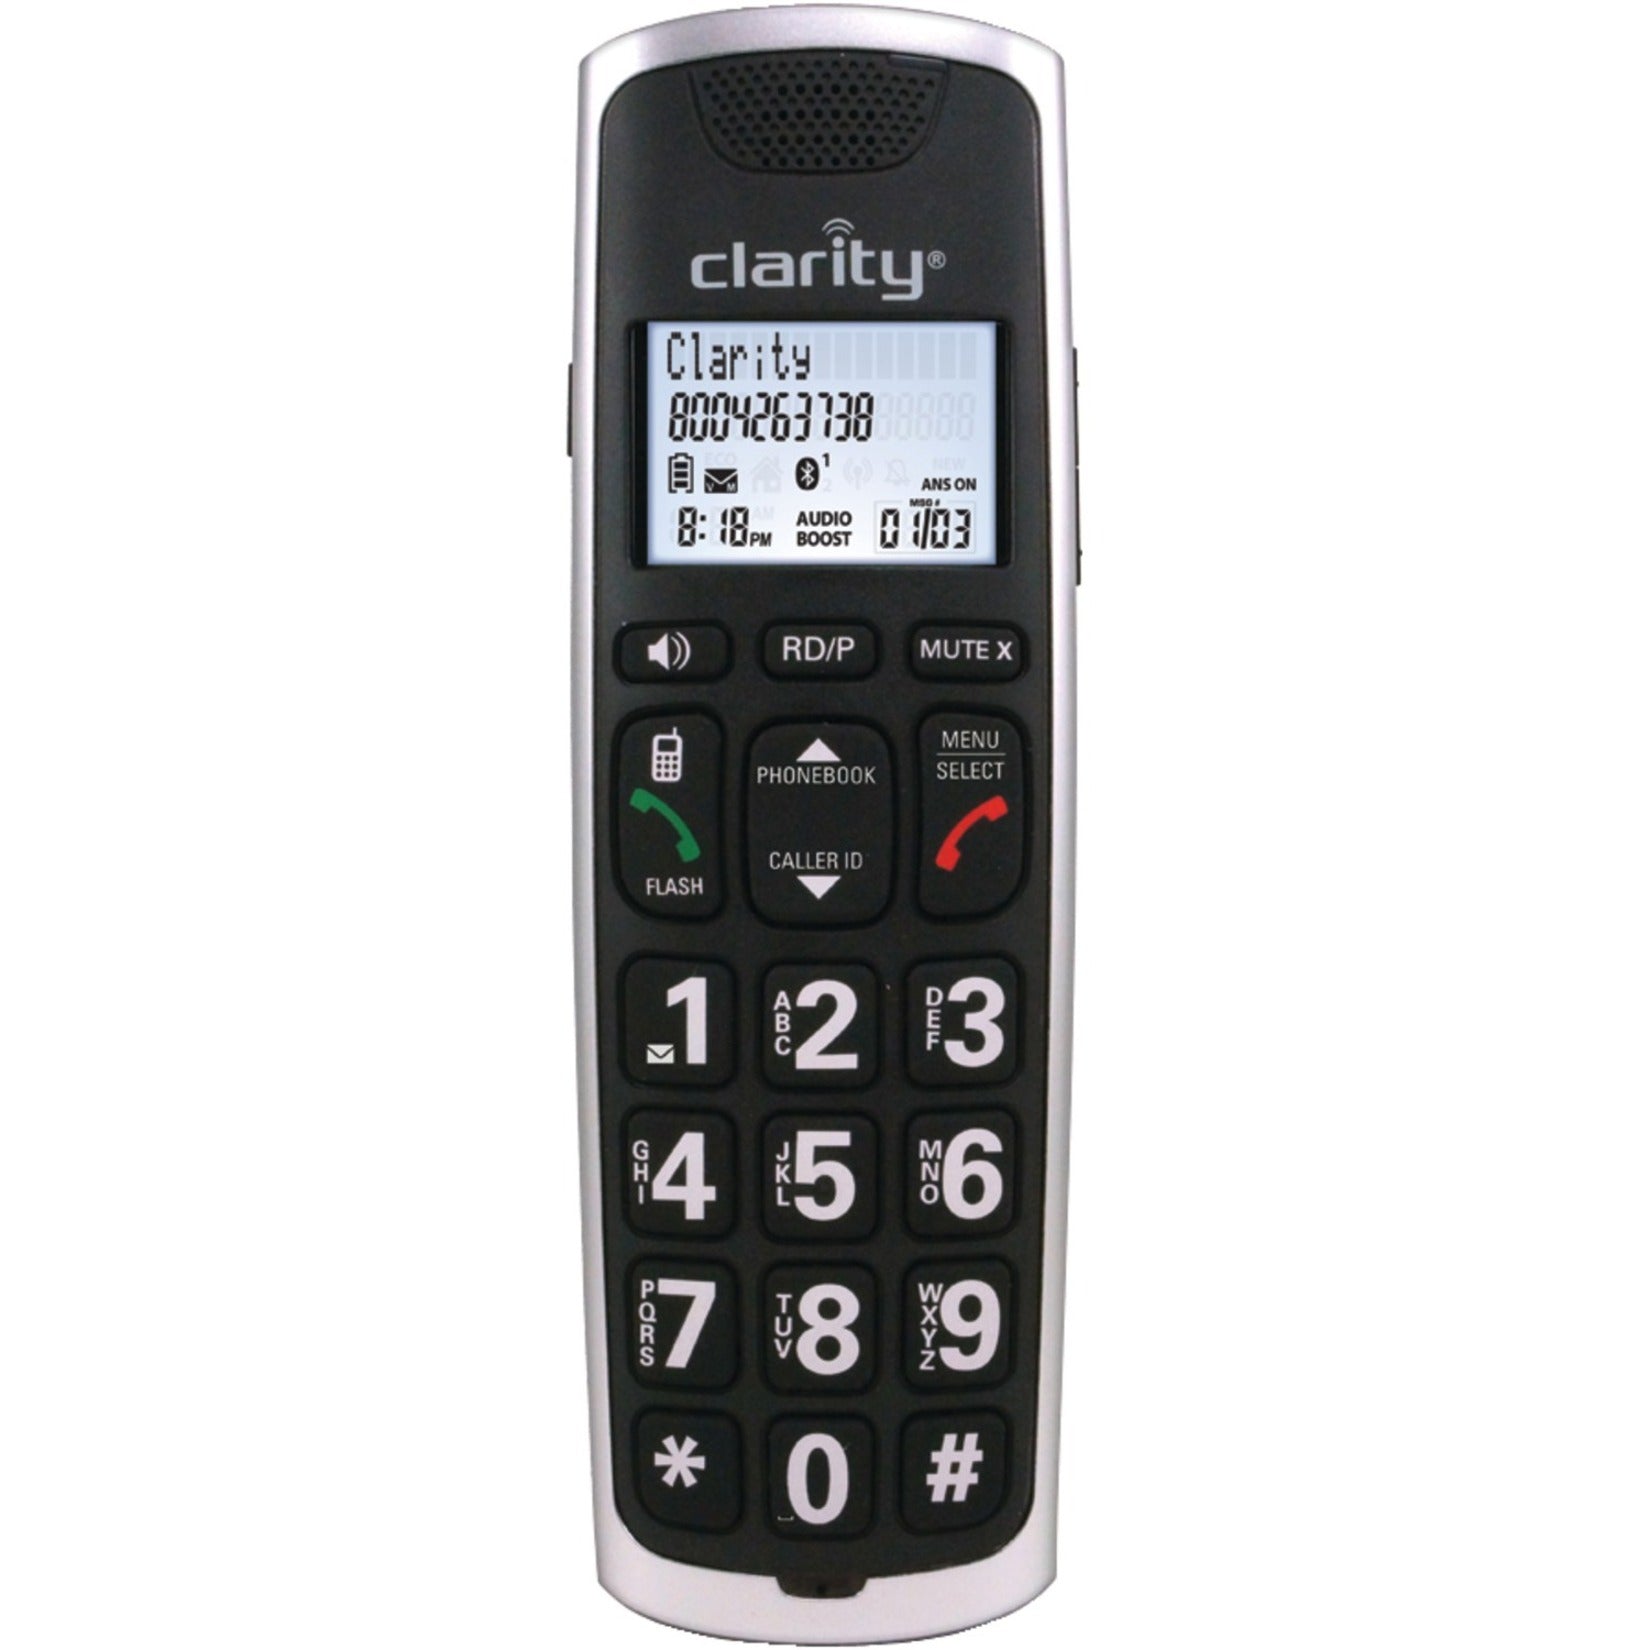 Clarity BT914 DECT 6.0 Cordless Phone 59914.001 Amplified Bluetooth Cordless Phone with Answering Machine, Expandable, Multiple Ring Tones, Visual Ringer